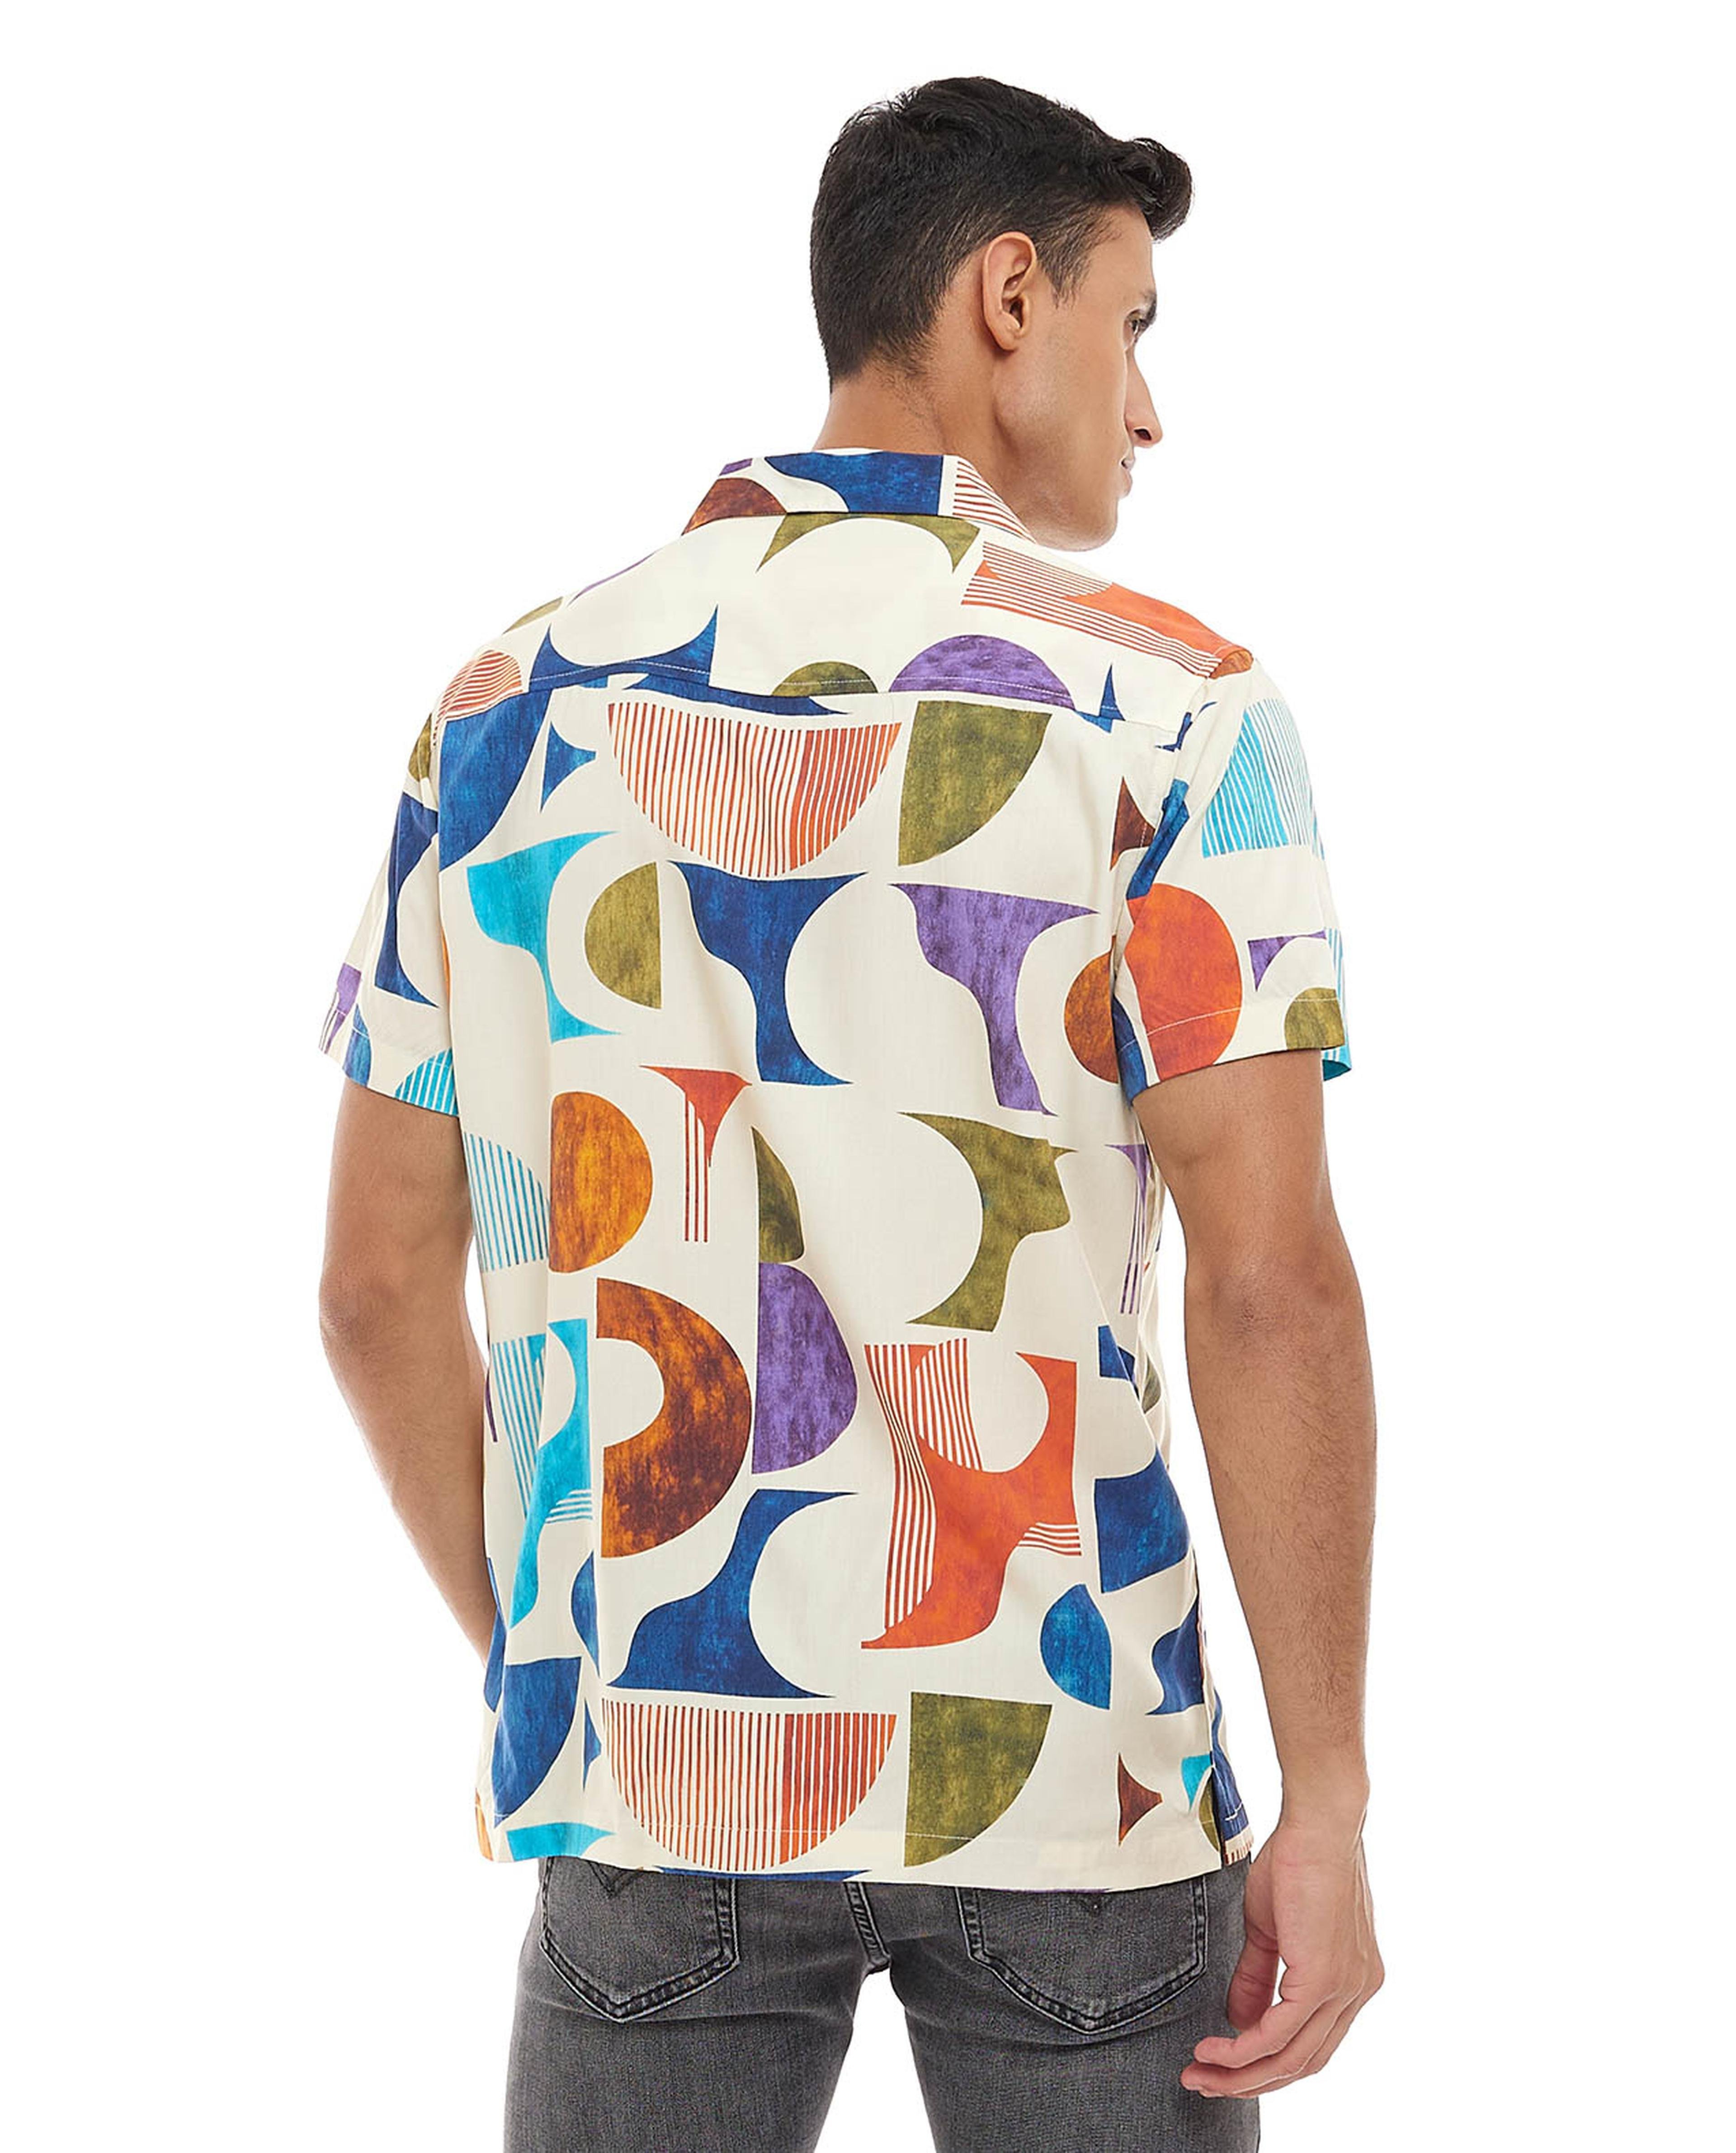 Abstract Print Shirt with Classic Collar and Short Sleeves